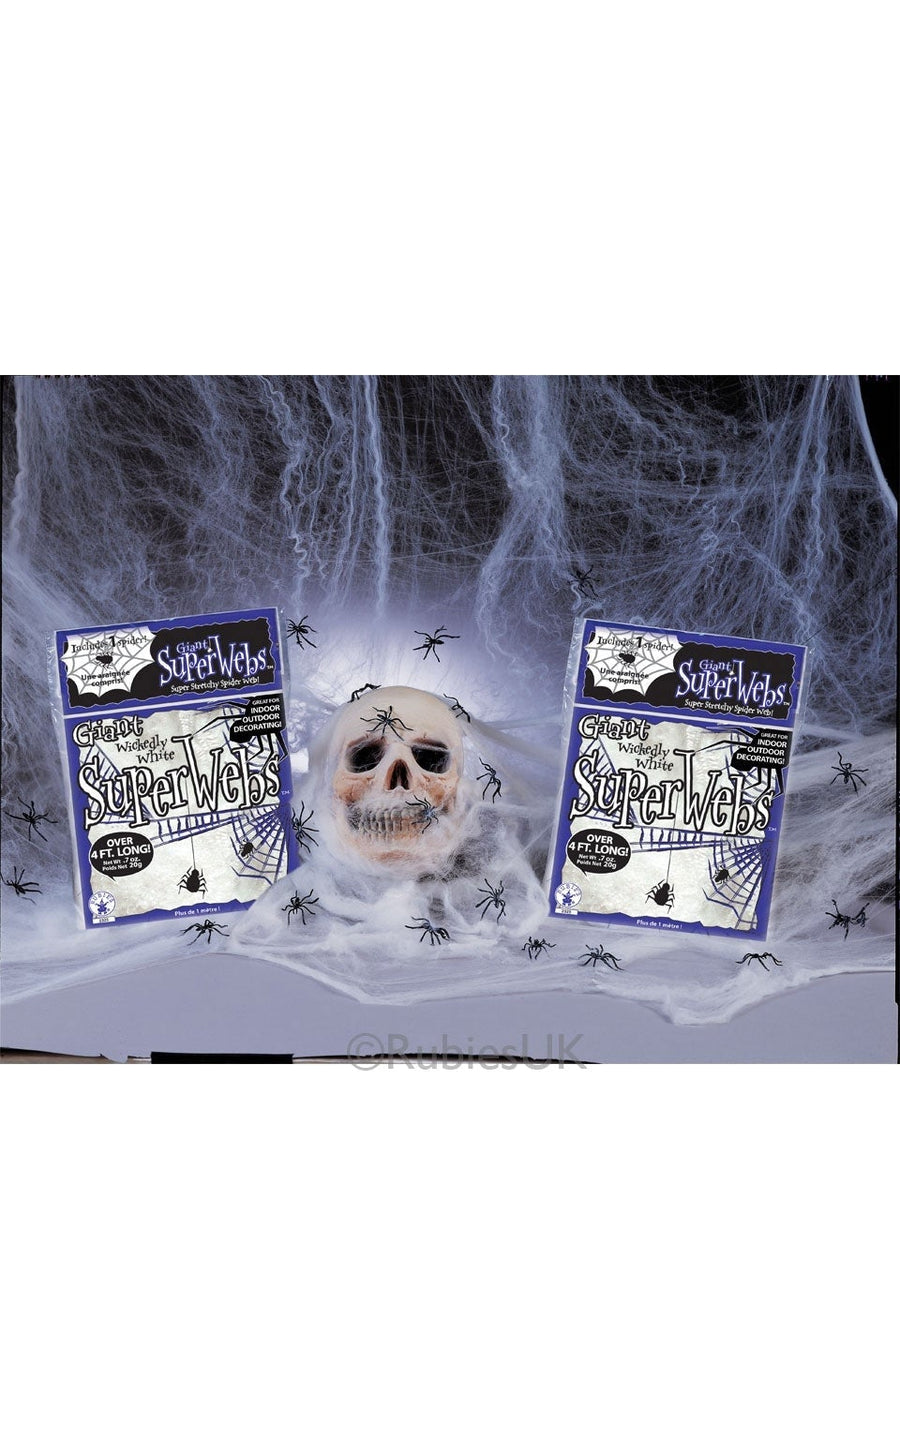 White Spider Webbing 20gram With Spiders Costume_1